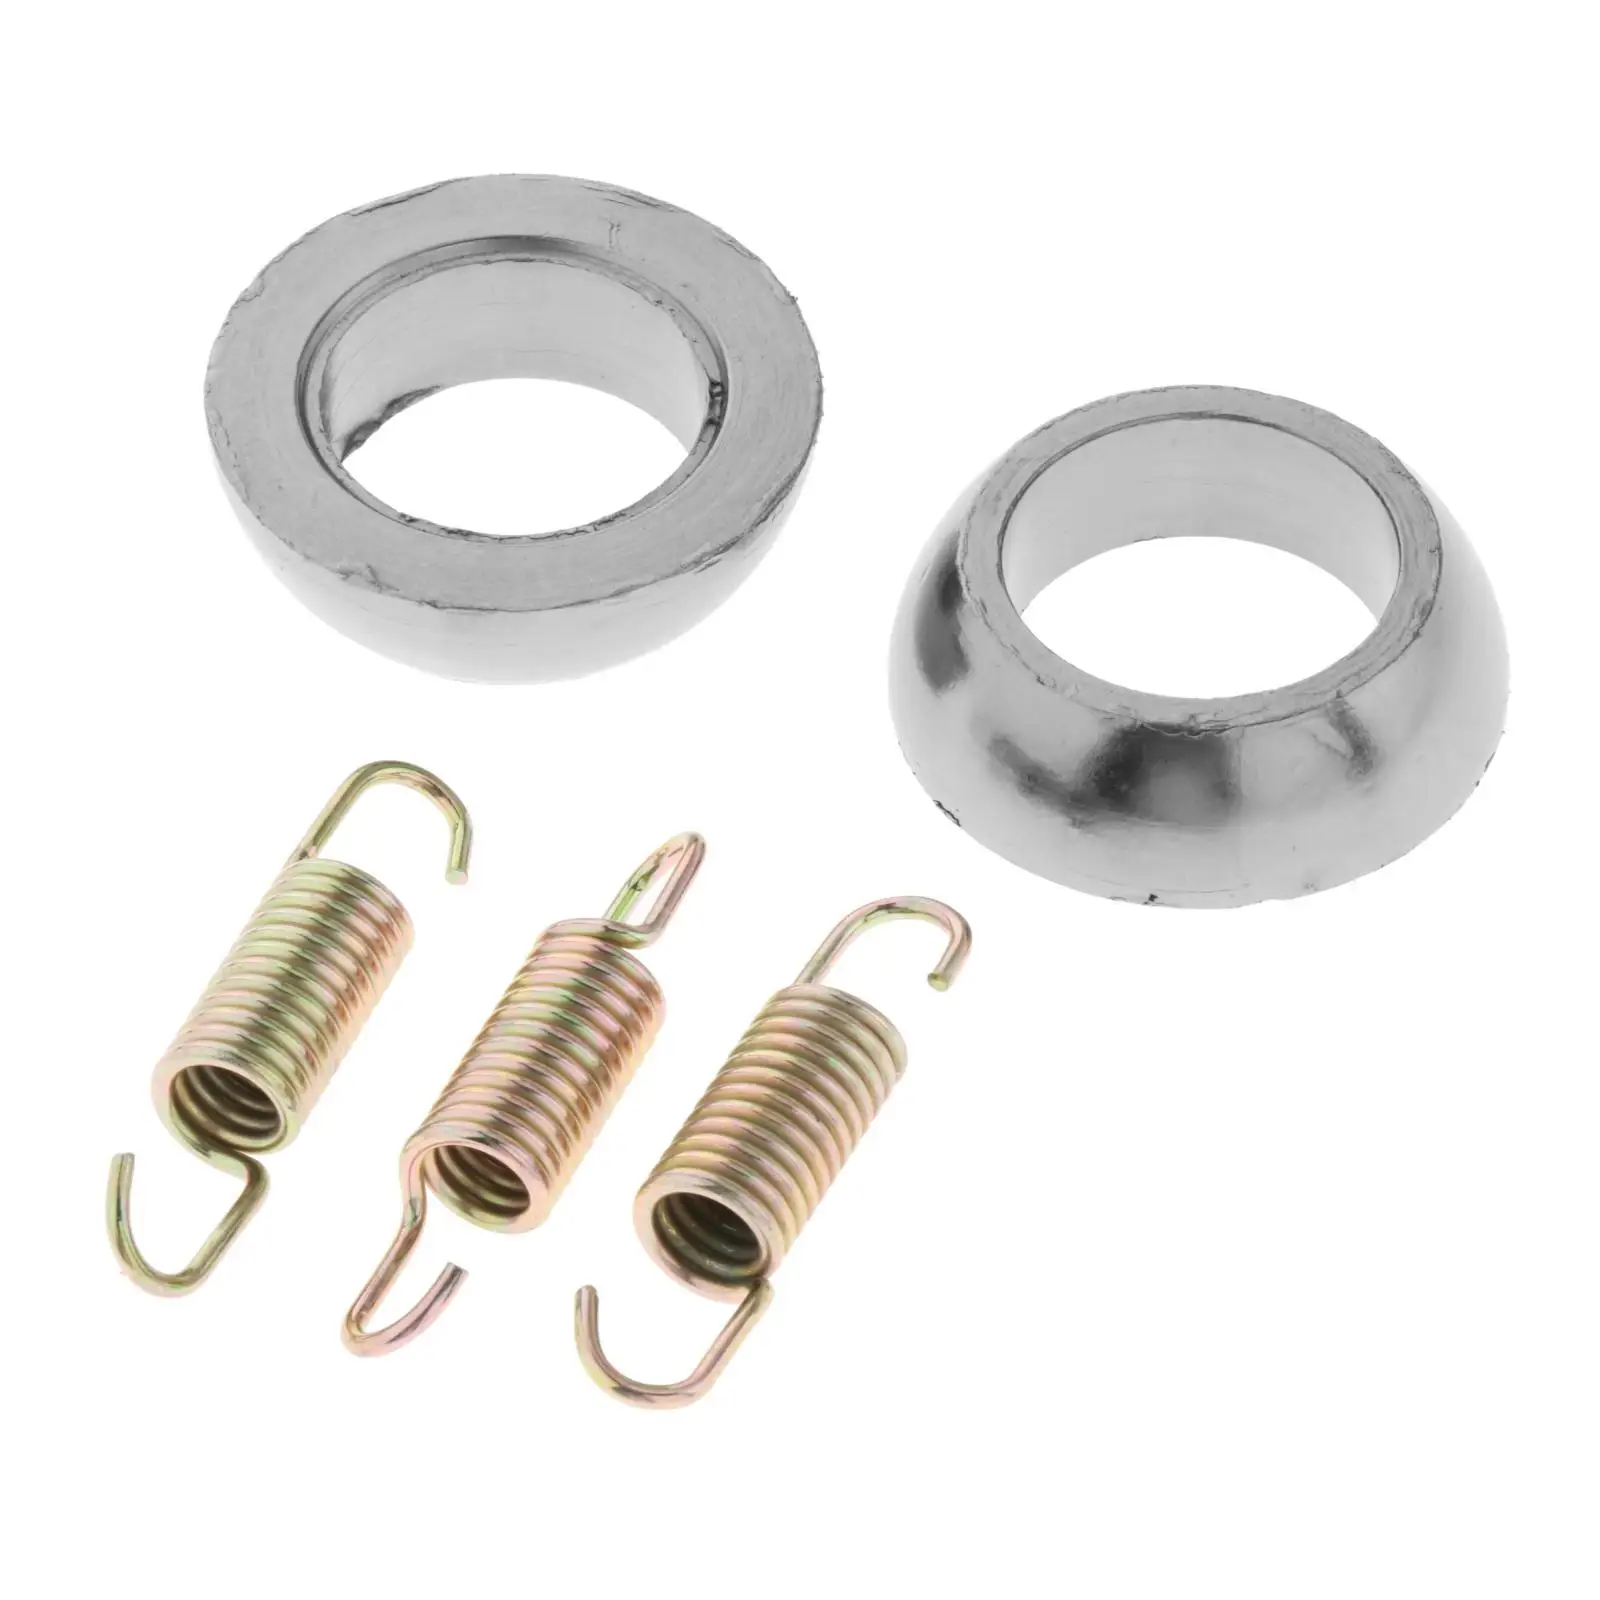  Exhaust Gasket & Spring Kit Accessories Fit for Arctic Cat 300 250